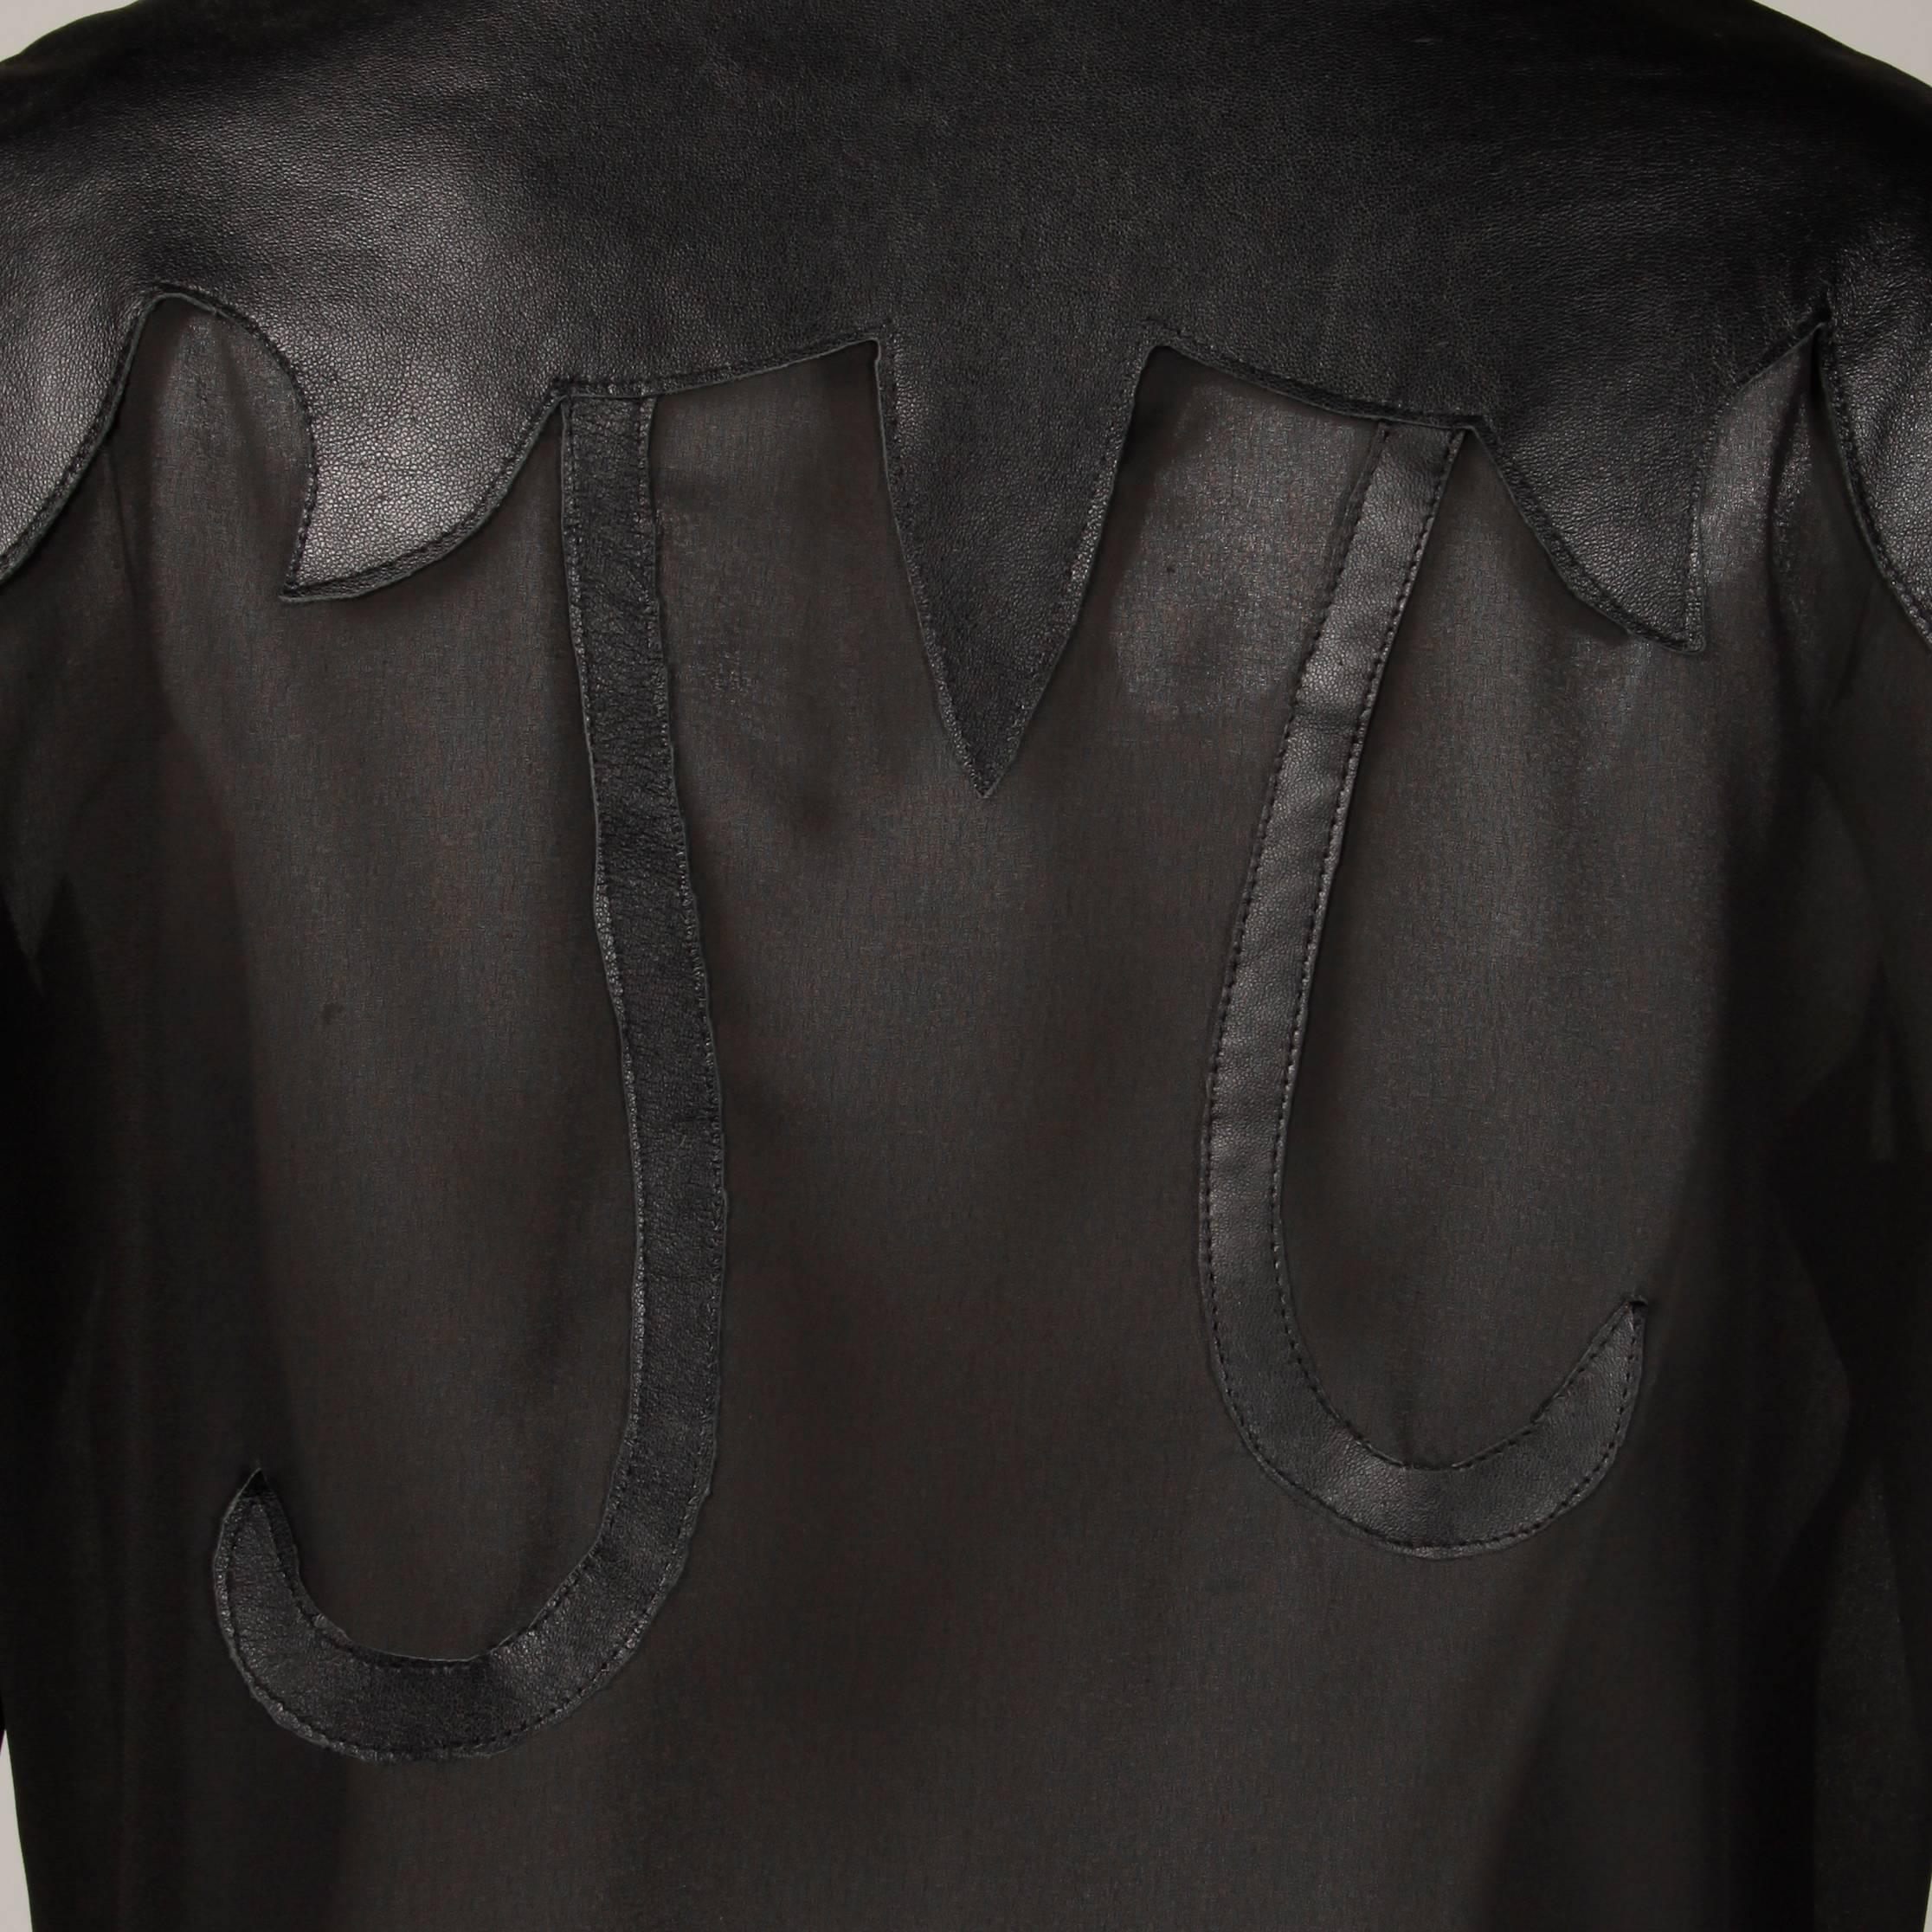 Women's Giorgio Sant'Angelo 1970s Vintage Black Leather Patchwork Blouse, Top or Shirt